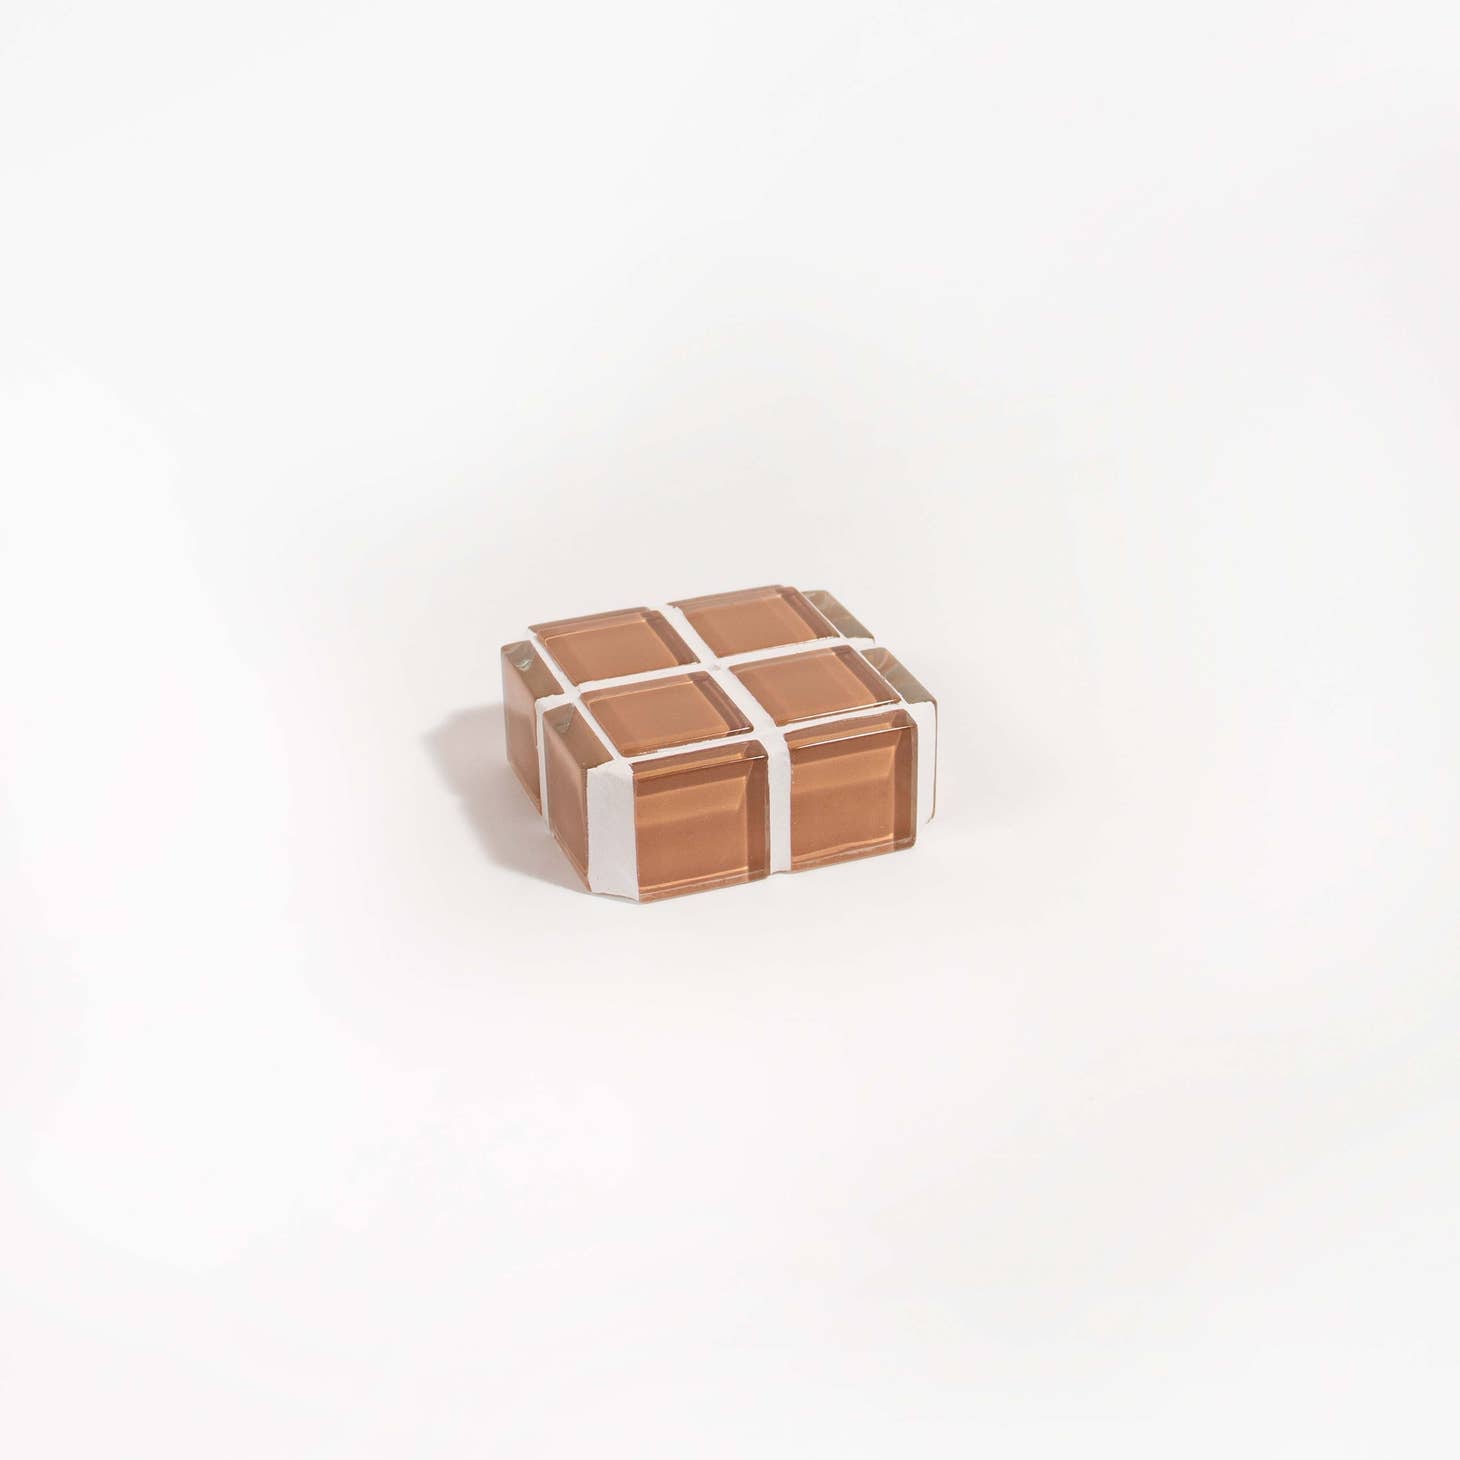 Rest your incense in this glass-tiled cube. This modern & minimal design offers an elevated way to indulge yourself in your favorite incense. For days finding your inner peace.